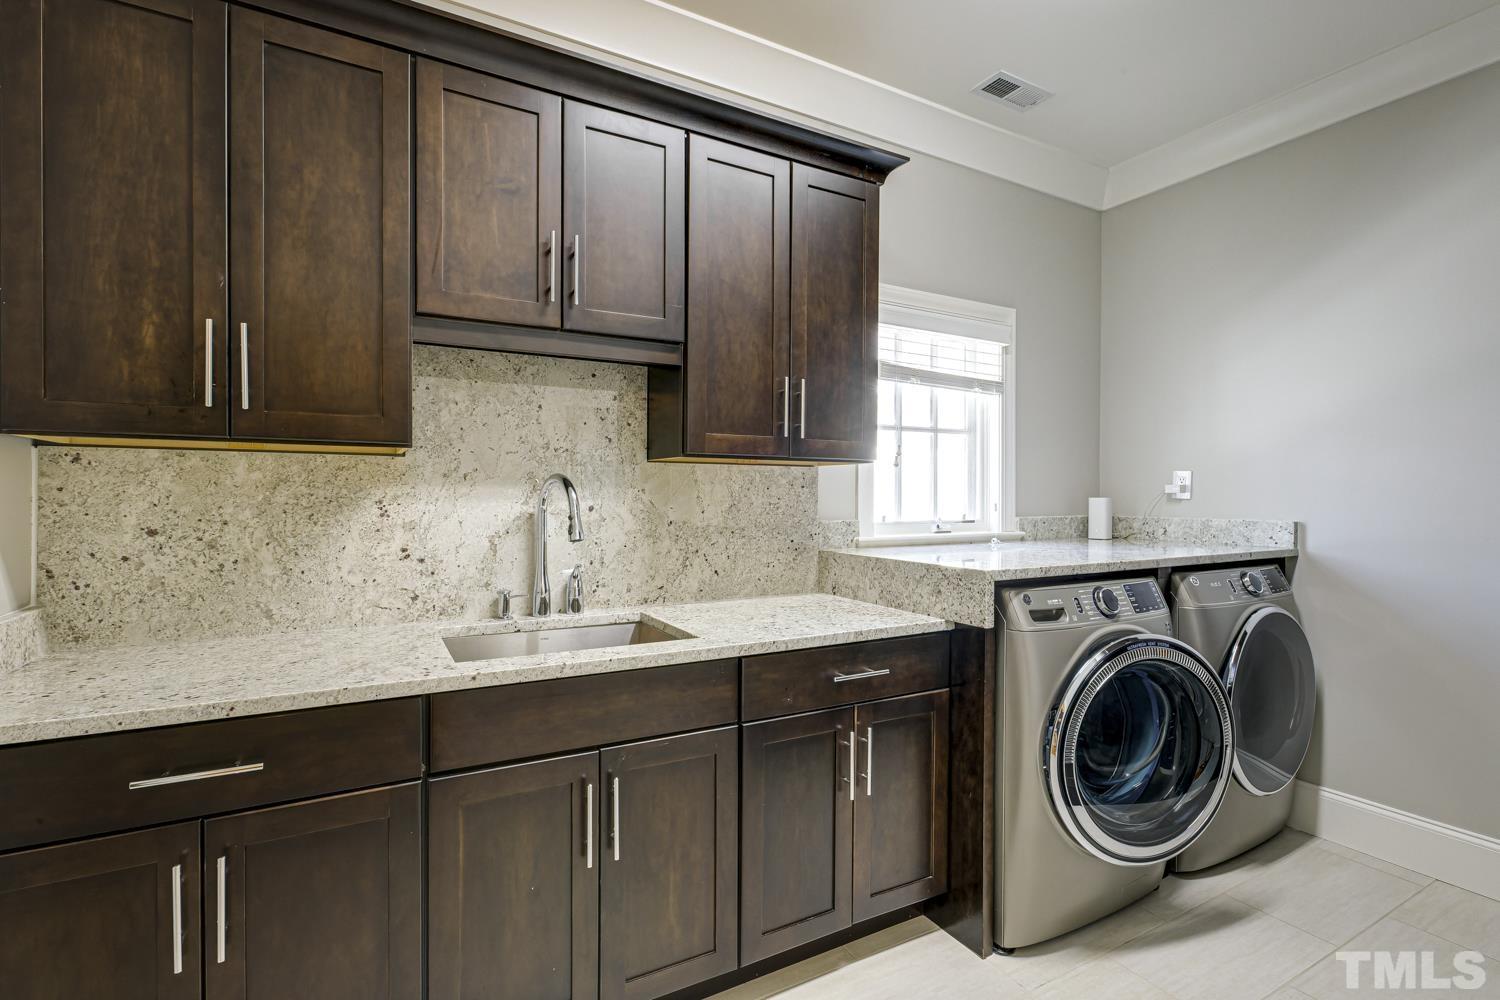 The laundry room is equipped with gorgeous custom cabinets (along the wall across from the washer/dryer-not shown in photo) as well as all of these cabinets and extra storage space.  There's a sink too!